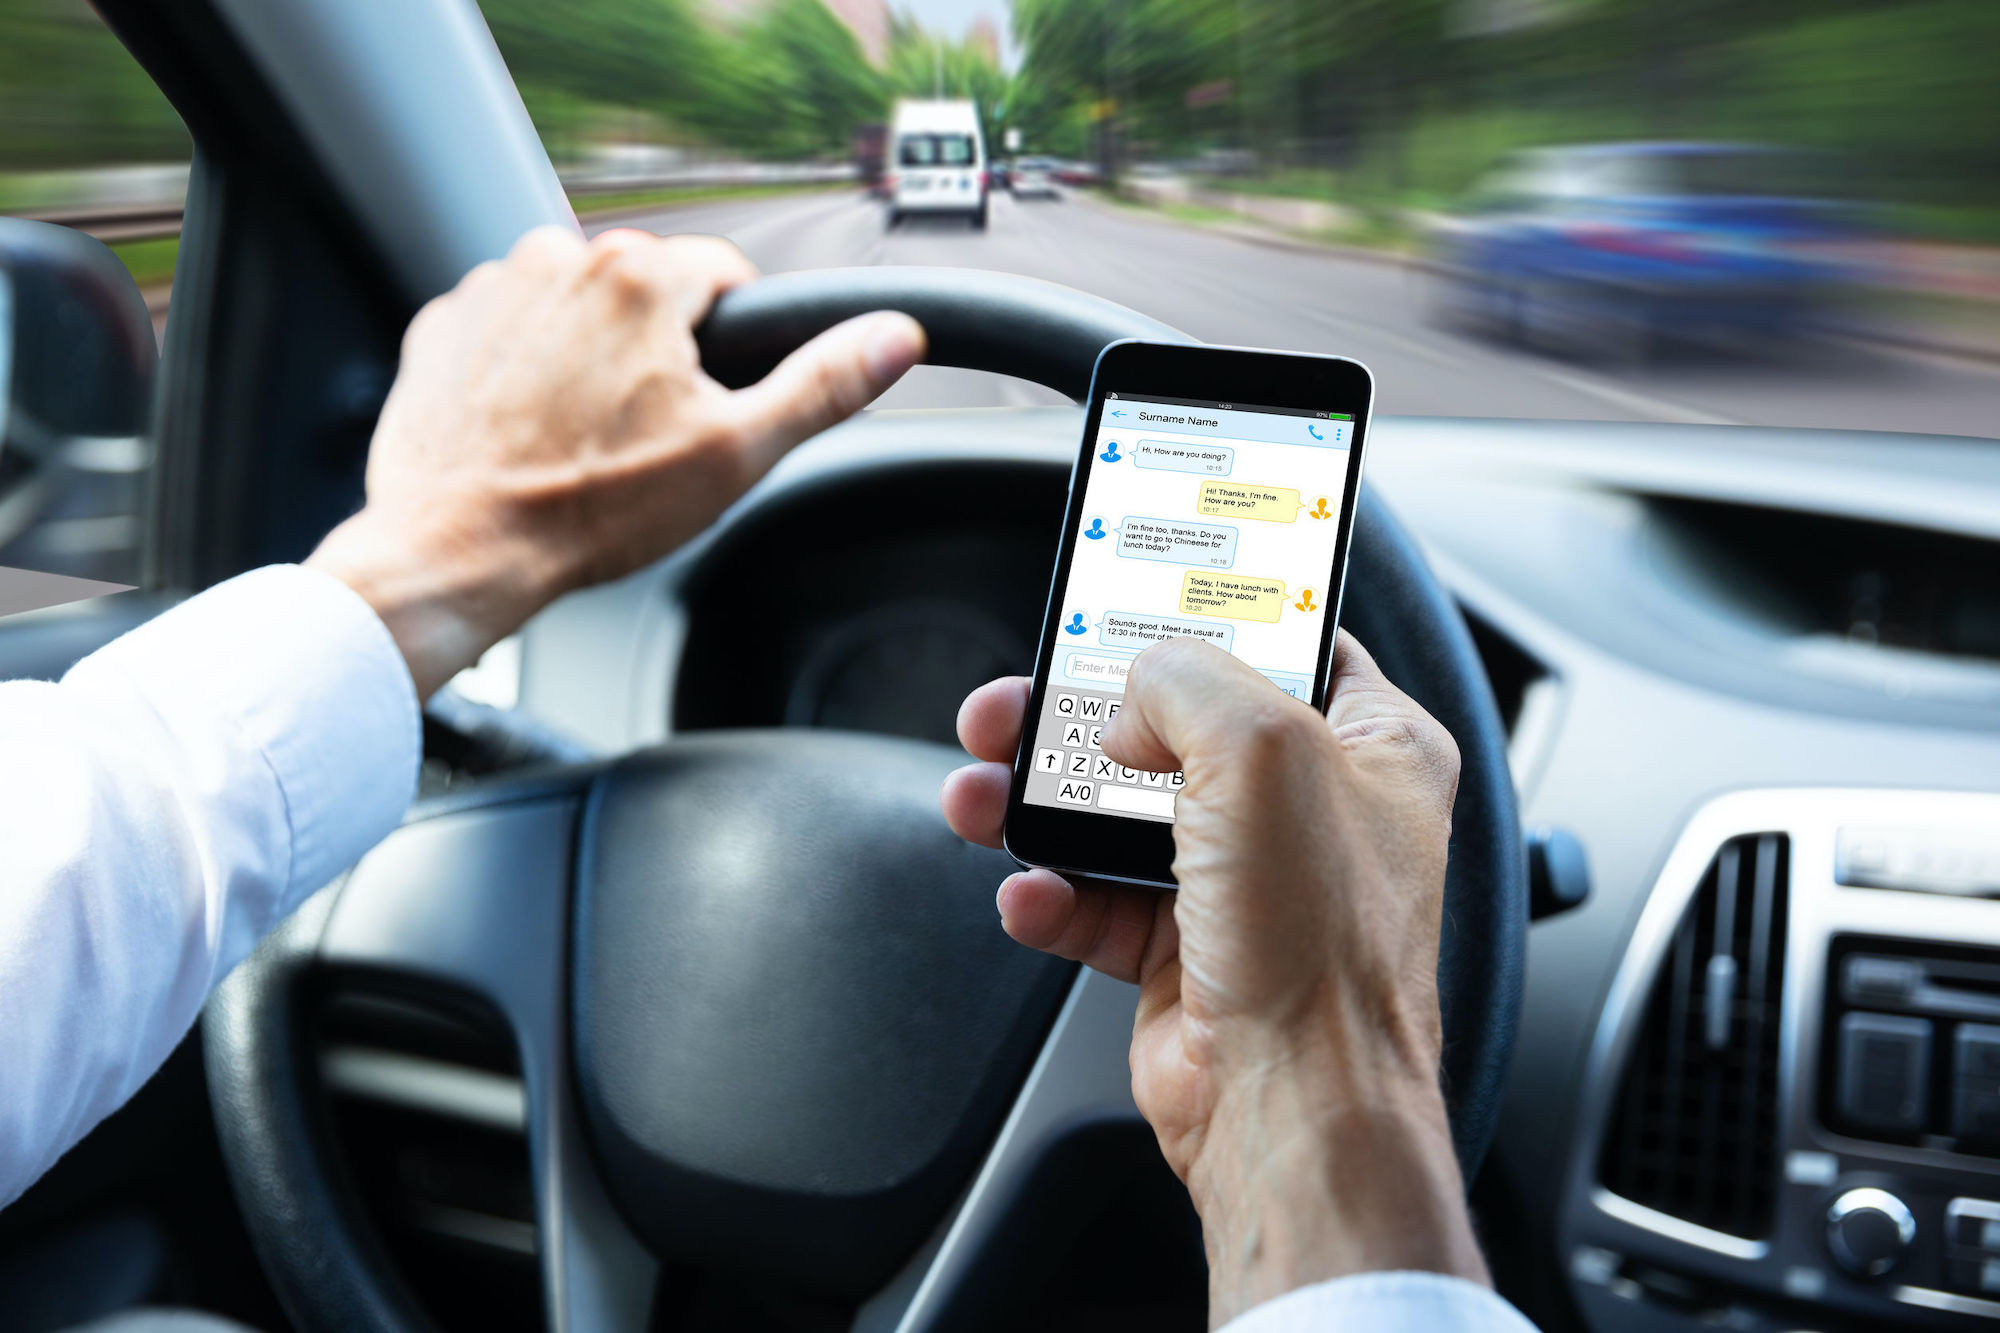 "Textalyzers" to Stop Texting While Driving